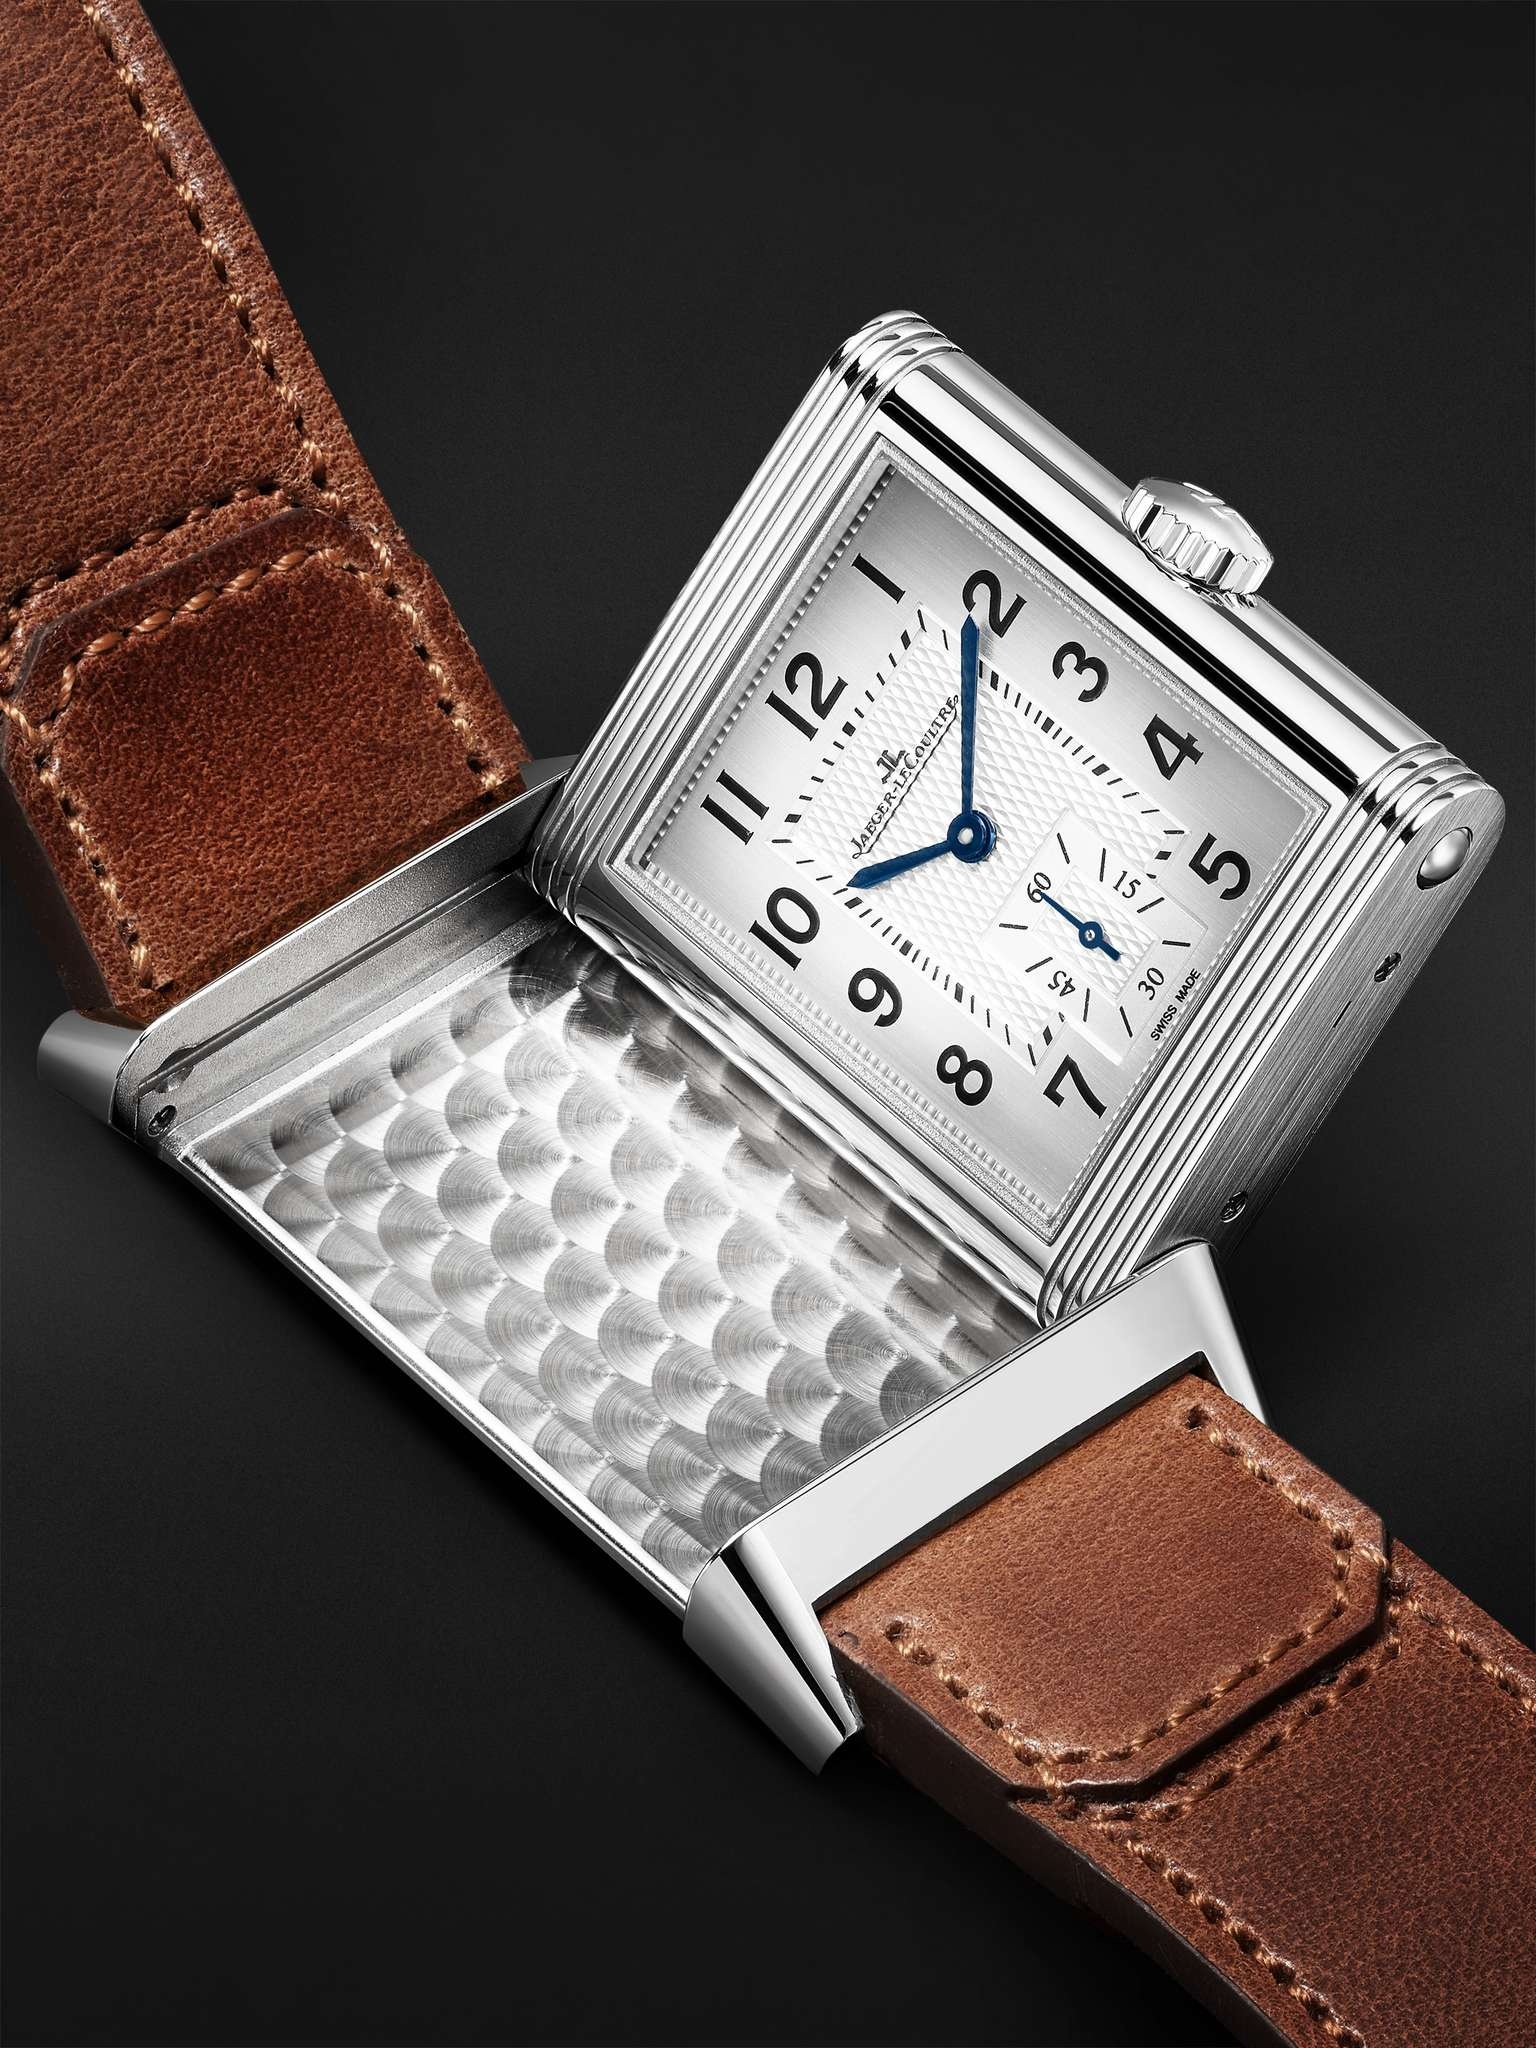 Reverso Classic Large Small Seconds Los Angeles Hand-Wound 45.6mm Stainless Steel and Leather Watch, - 3